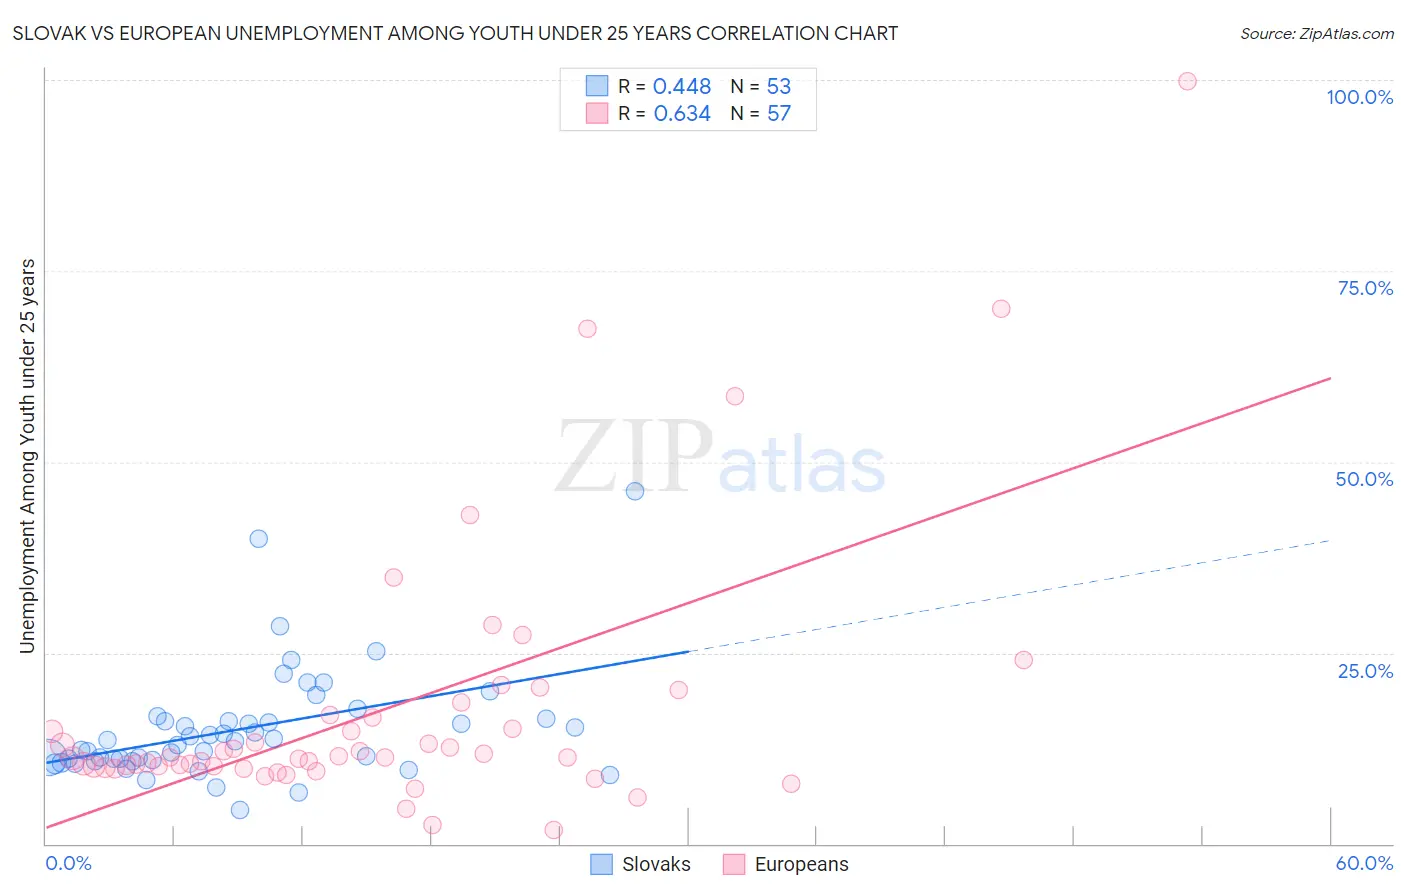 Slovak vs European Unemployment Among Youth under 25 years